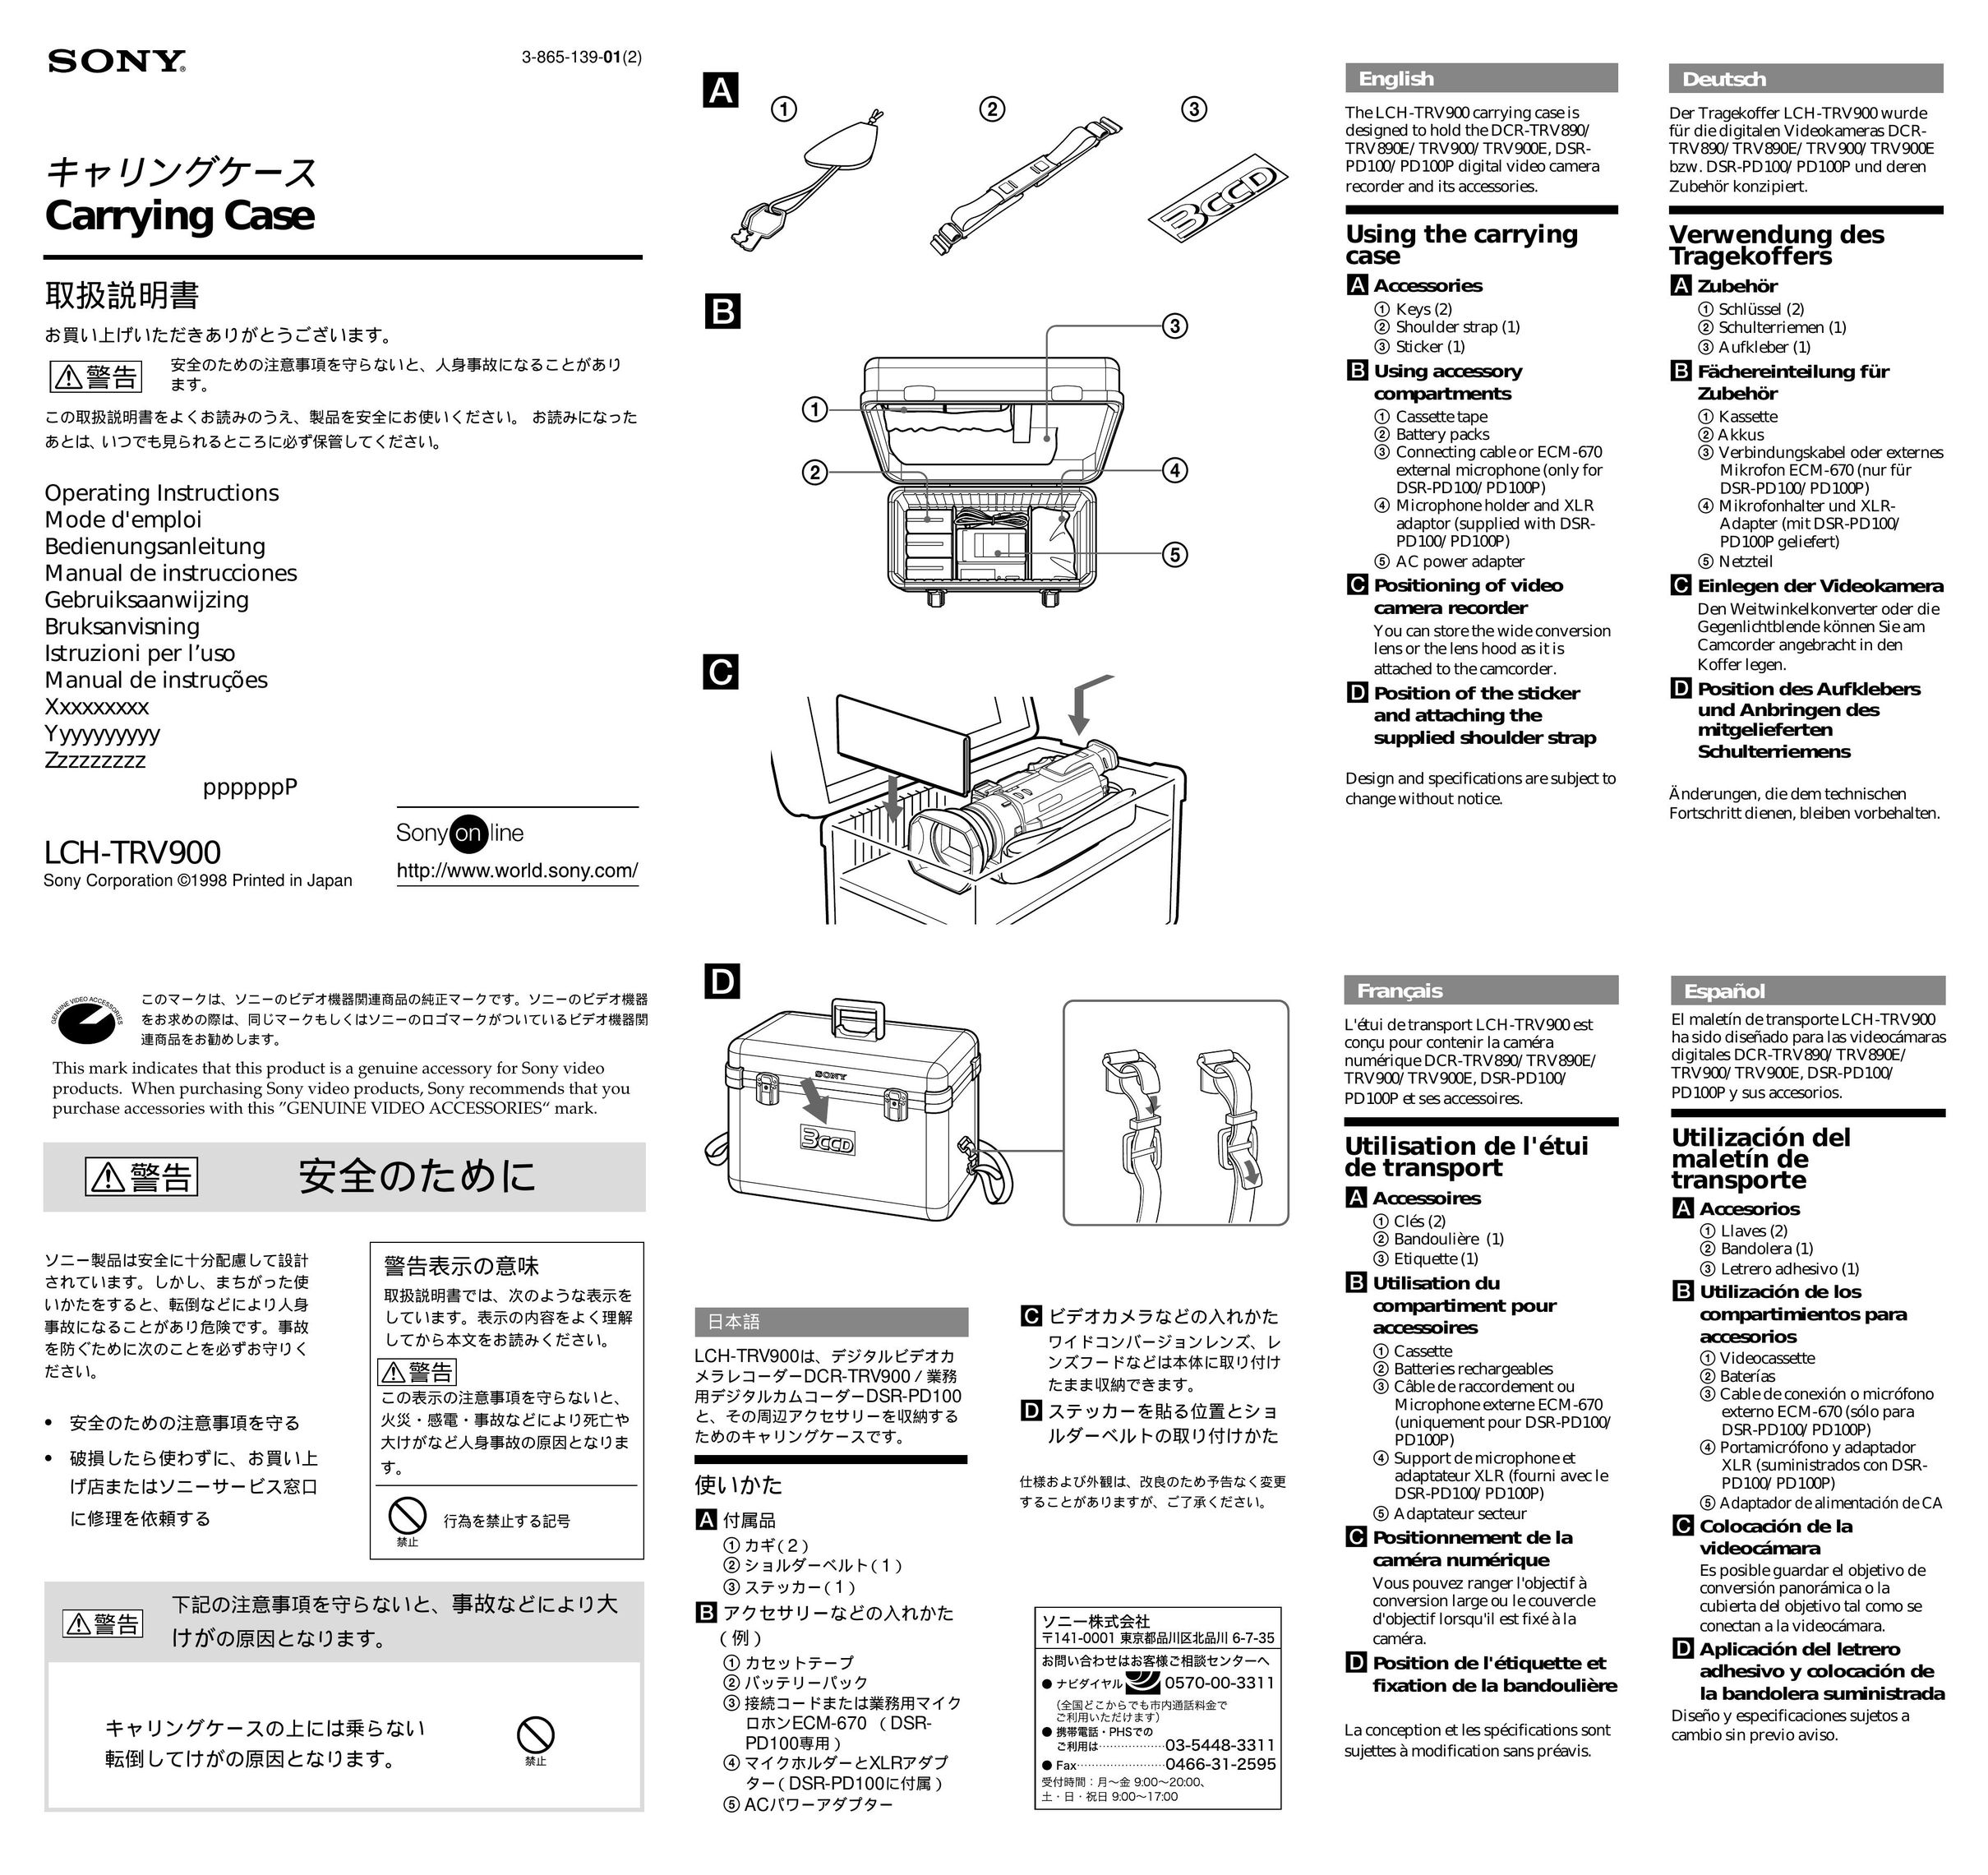 Sony LCH-TRV900 Carrying Case User Manual